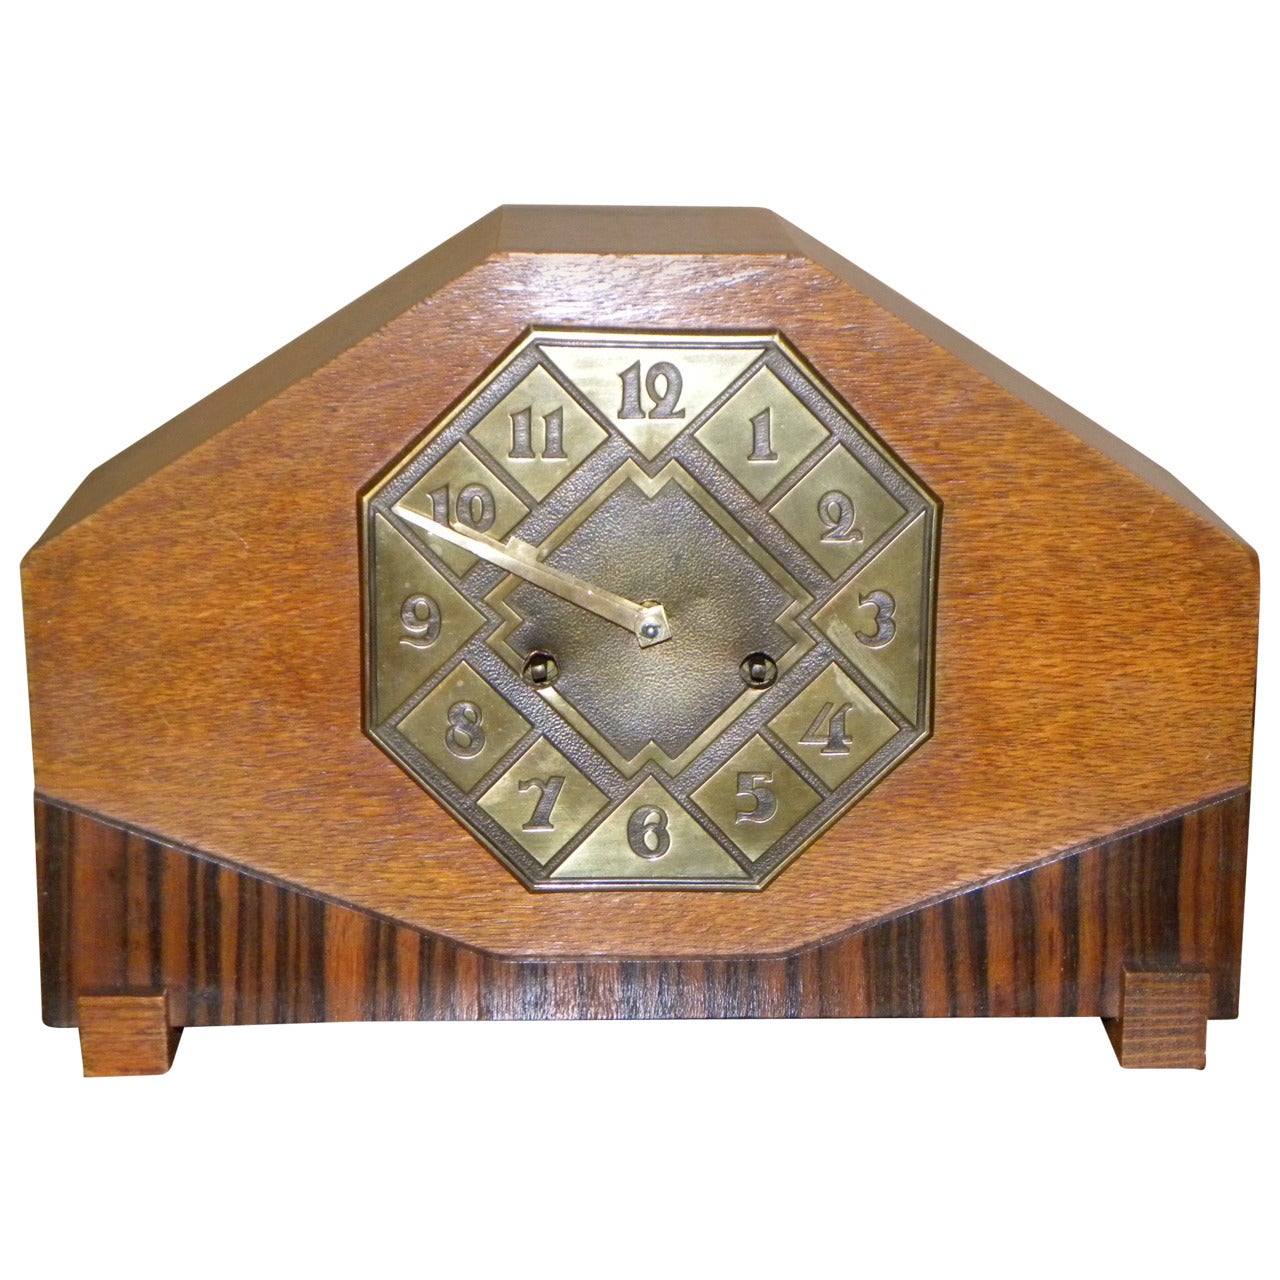 Striking Art Deco Mantle Clock with Mixed Wood and Brass Detail